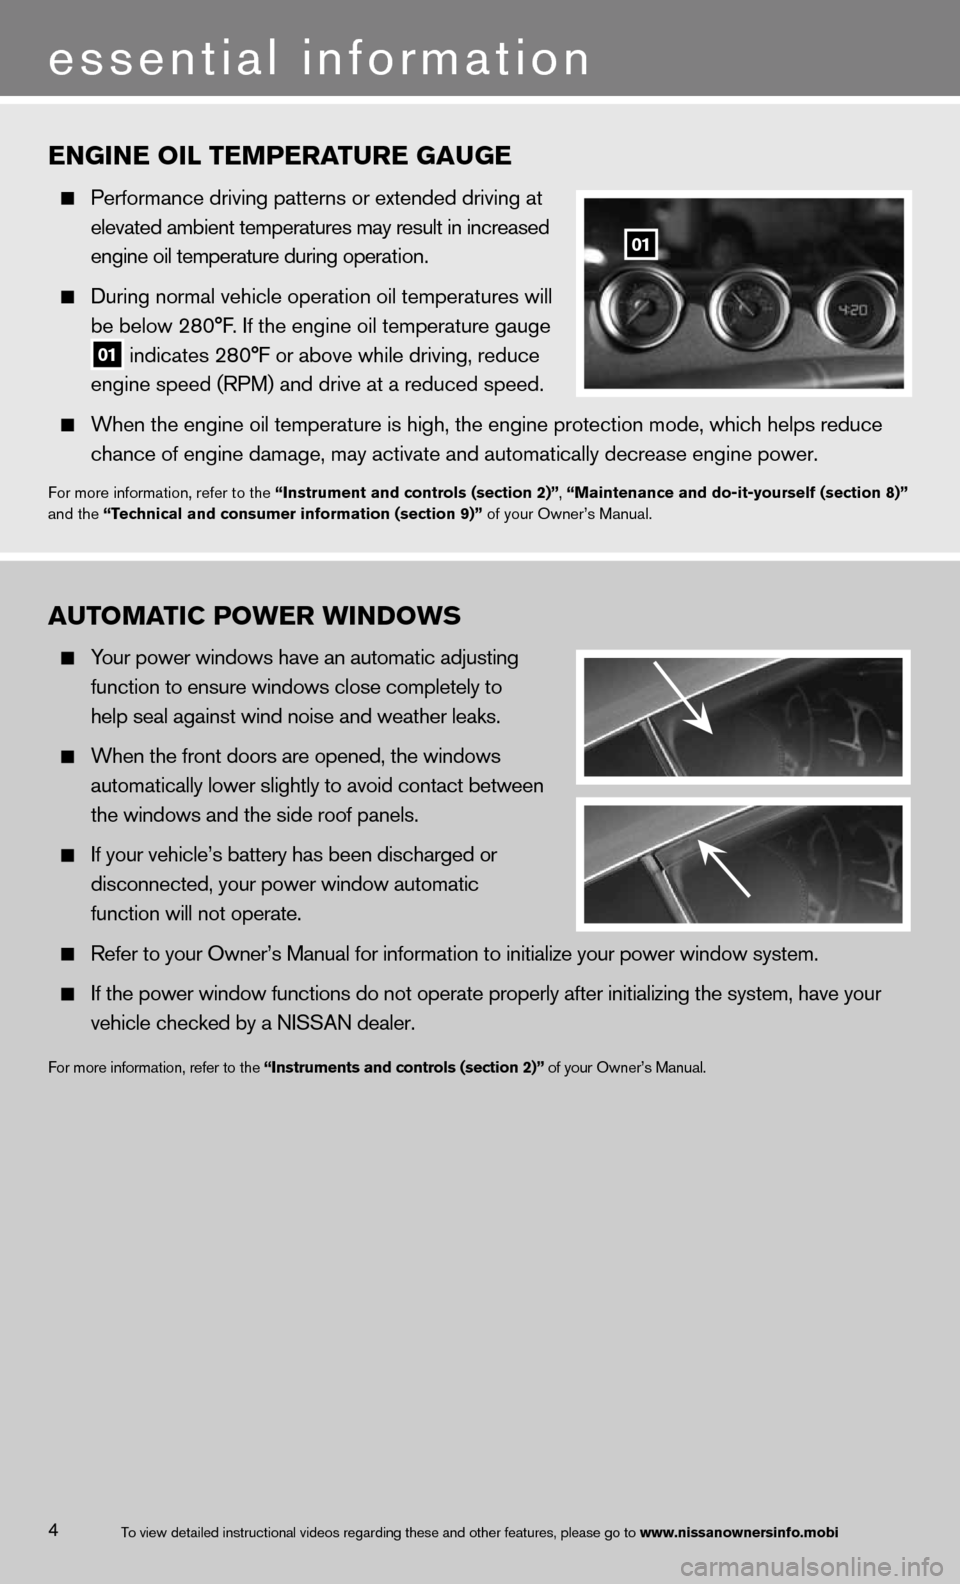 NISSAN 370Z COUPE 2013 Z34 Quick Reference Guide 4
ENGINE OI\b TEMPER\fTURE G\fUGE
  Performance driving\m pa\f\ferns or ex\fende\md driving a\f 
    eleva\fed ambien\f \femp\mera\fures may resul\f \min increased 
    engine oil \fempera\fu\mre duri